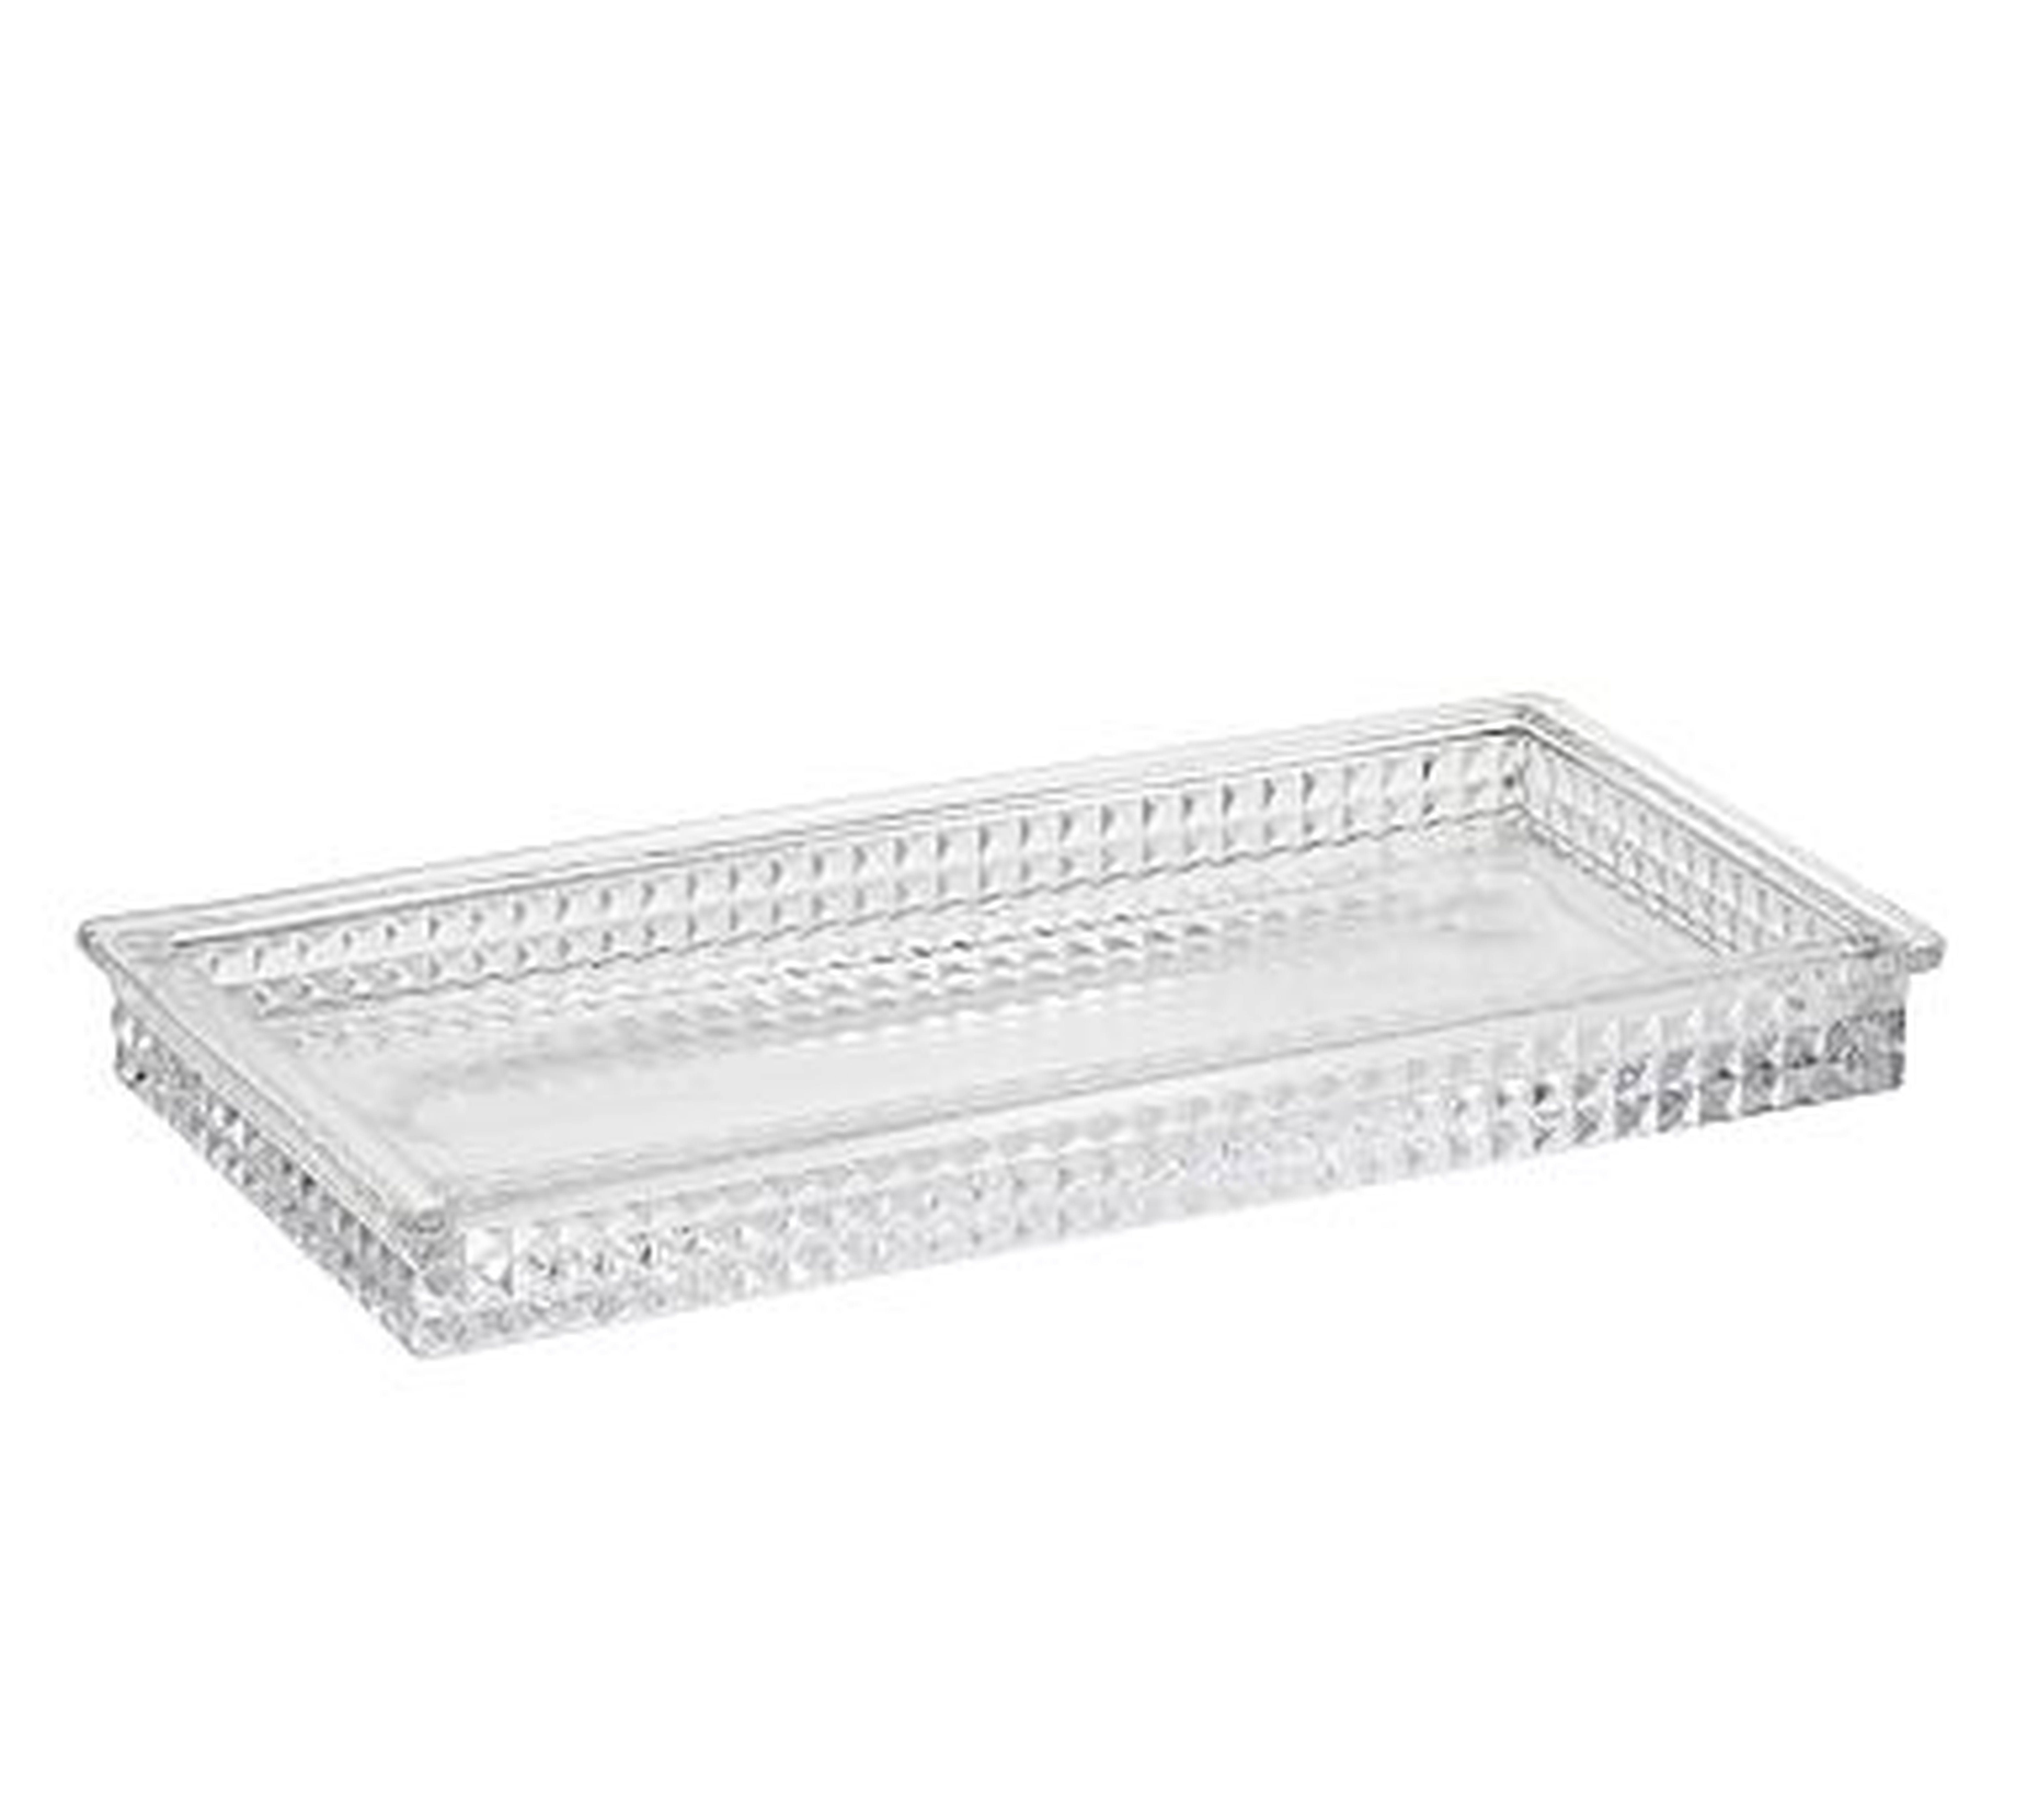 Pressed Glass Tray - Pottery Barn